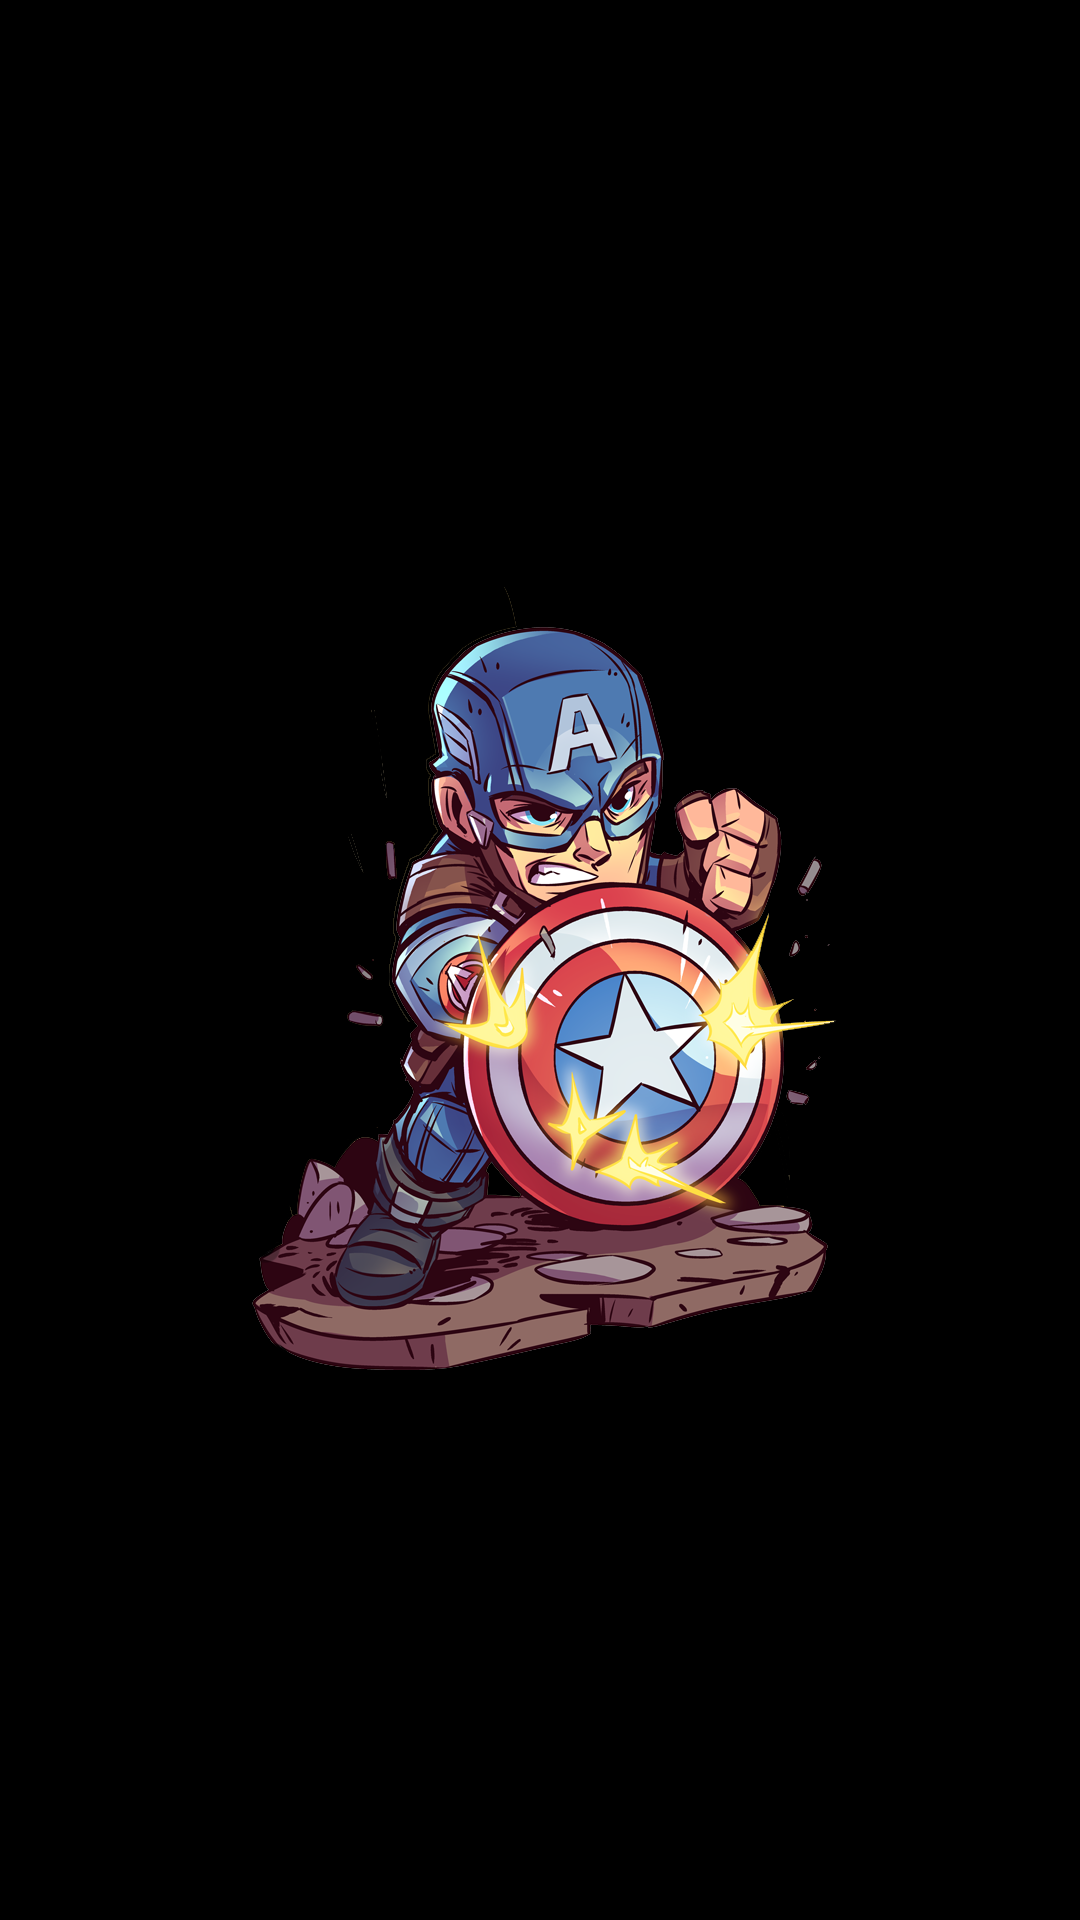 Marvel Amoled Android iPhone Mobile .wallpapertip.com